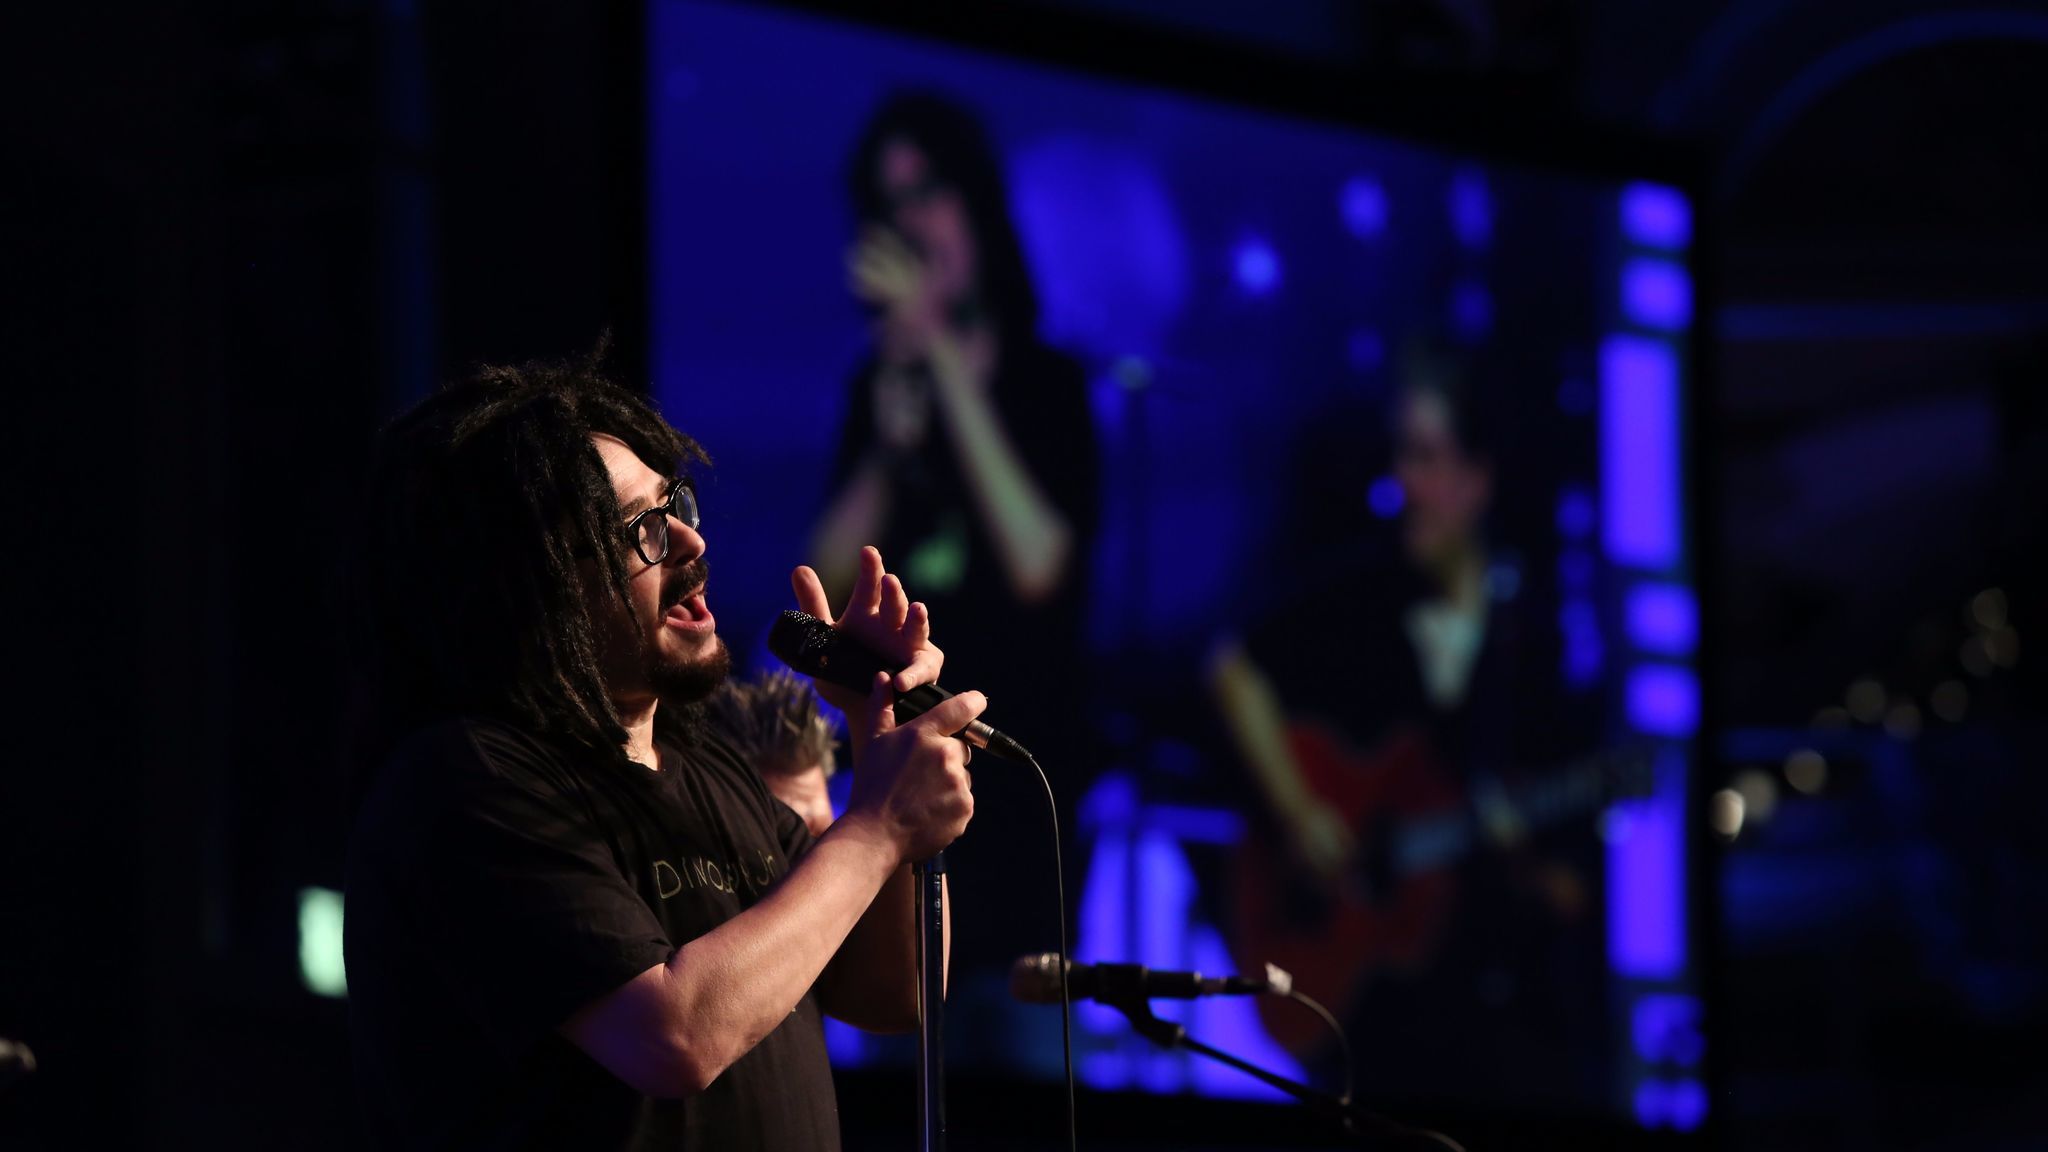 Adam Duritz of Counting Crows performs at the Cool Comedy Hot Cuisine event.